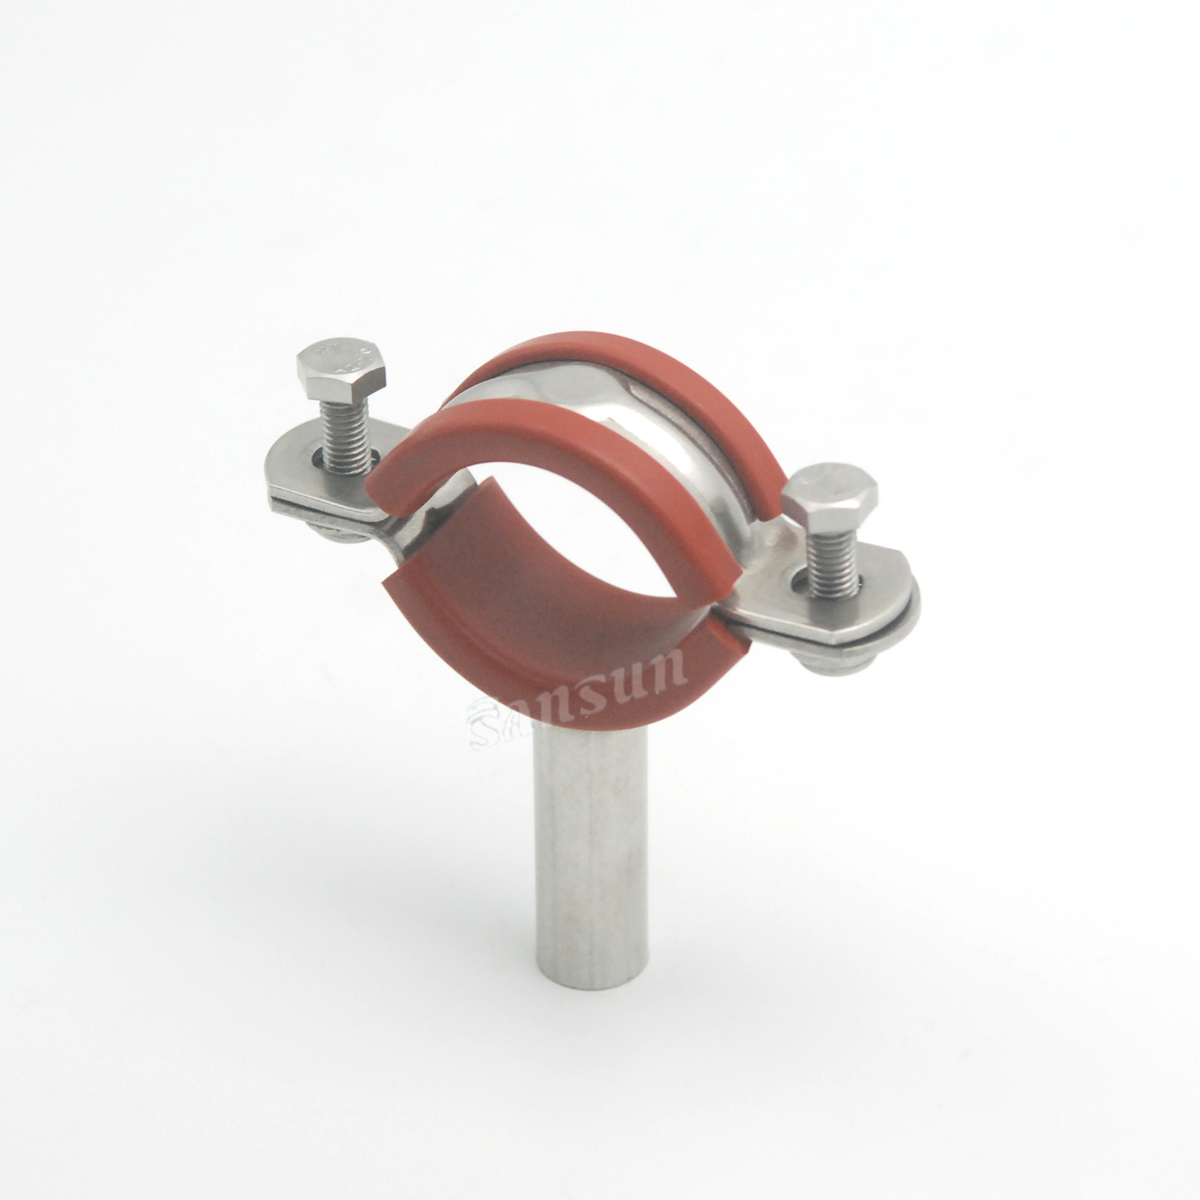 Hygienic Tube Holder pipe support with rubber